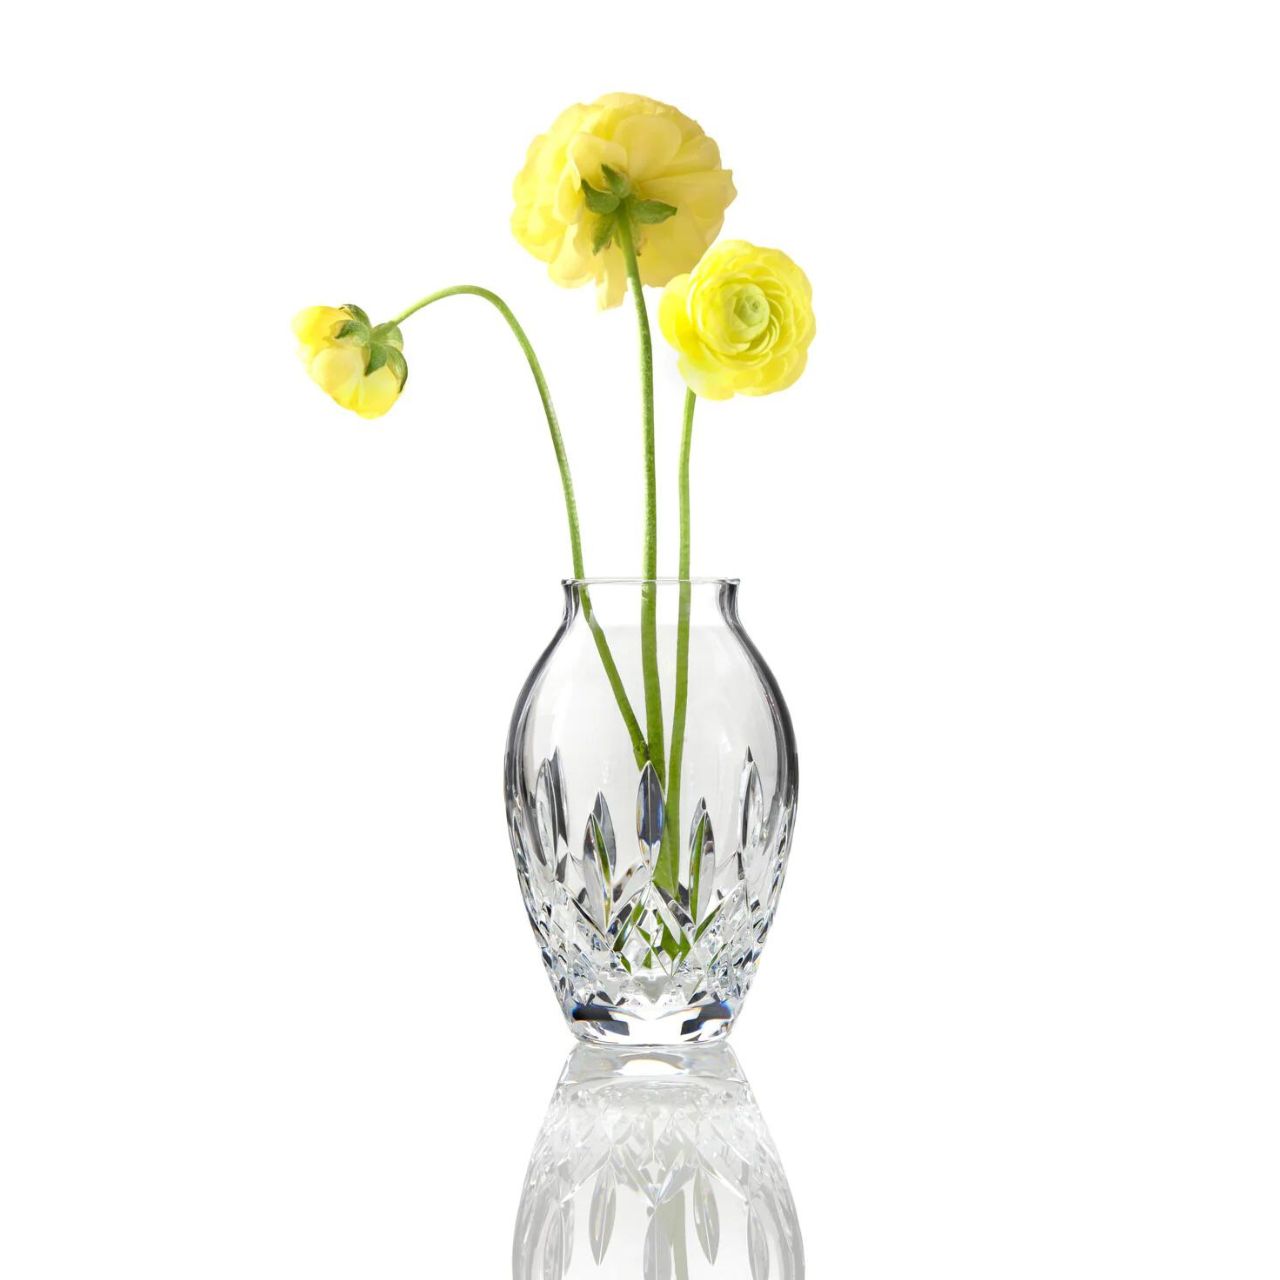 Giftology Lismore Candy 13cm Bud Vase by Waterford  The Giftology collection features Waterford's best crystal gifts in compelling gift boxes designed in 5 different eye-catching colour schemes with opulent gold touches. We think of Giftology as the science of gift giving in a fast paced world.